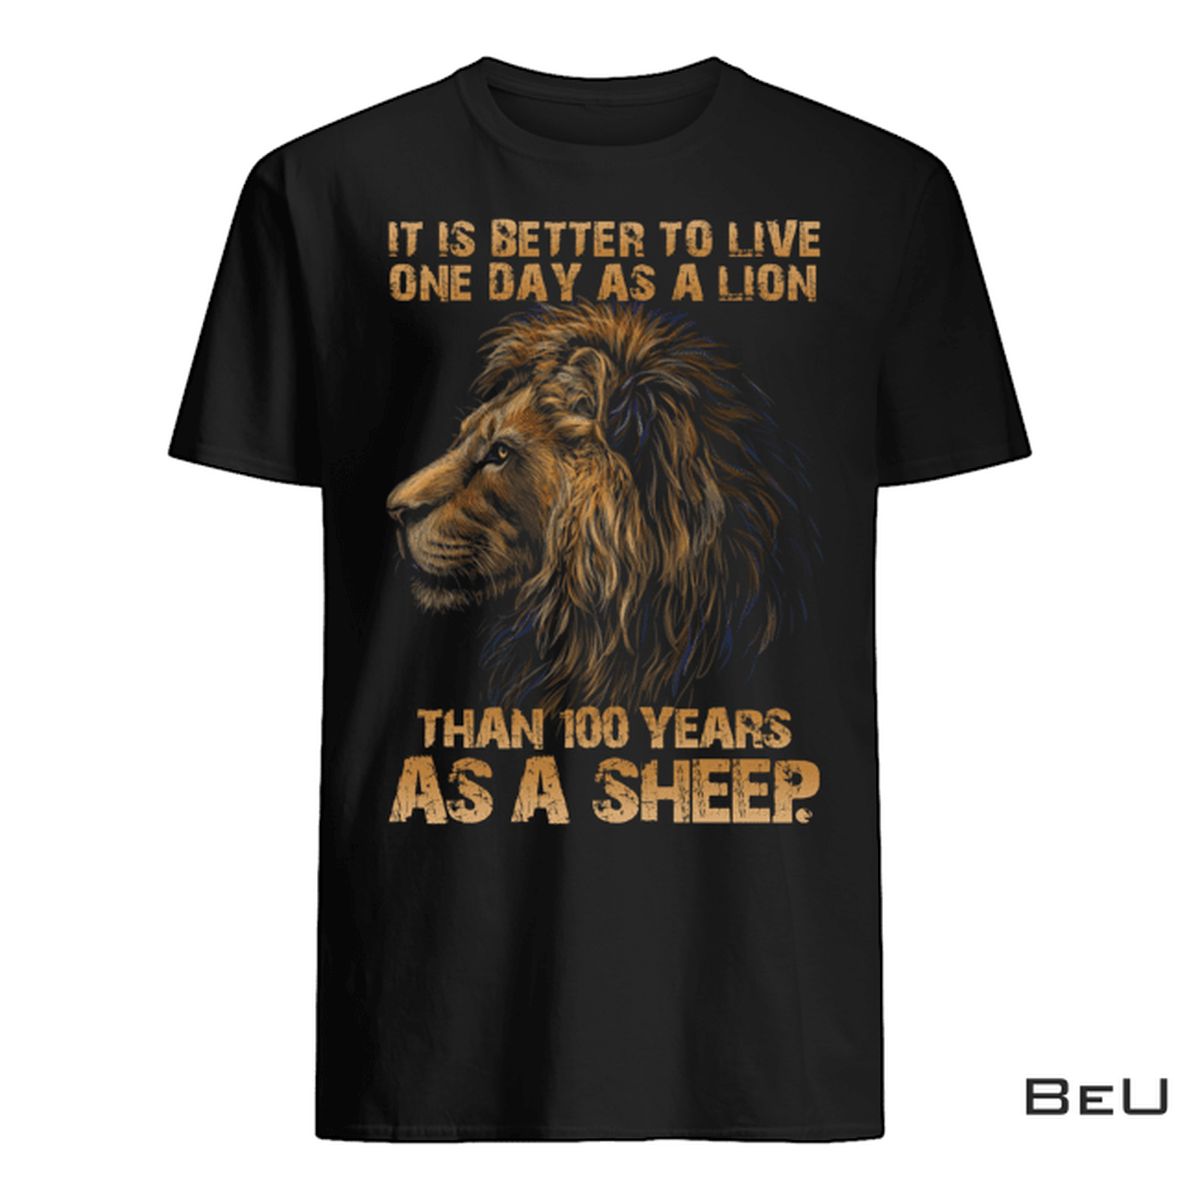 It's Better To Live One Day As A Lion Than A Sheep Shirt